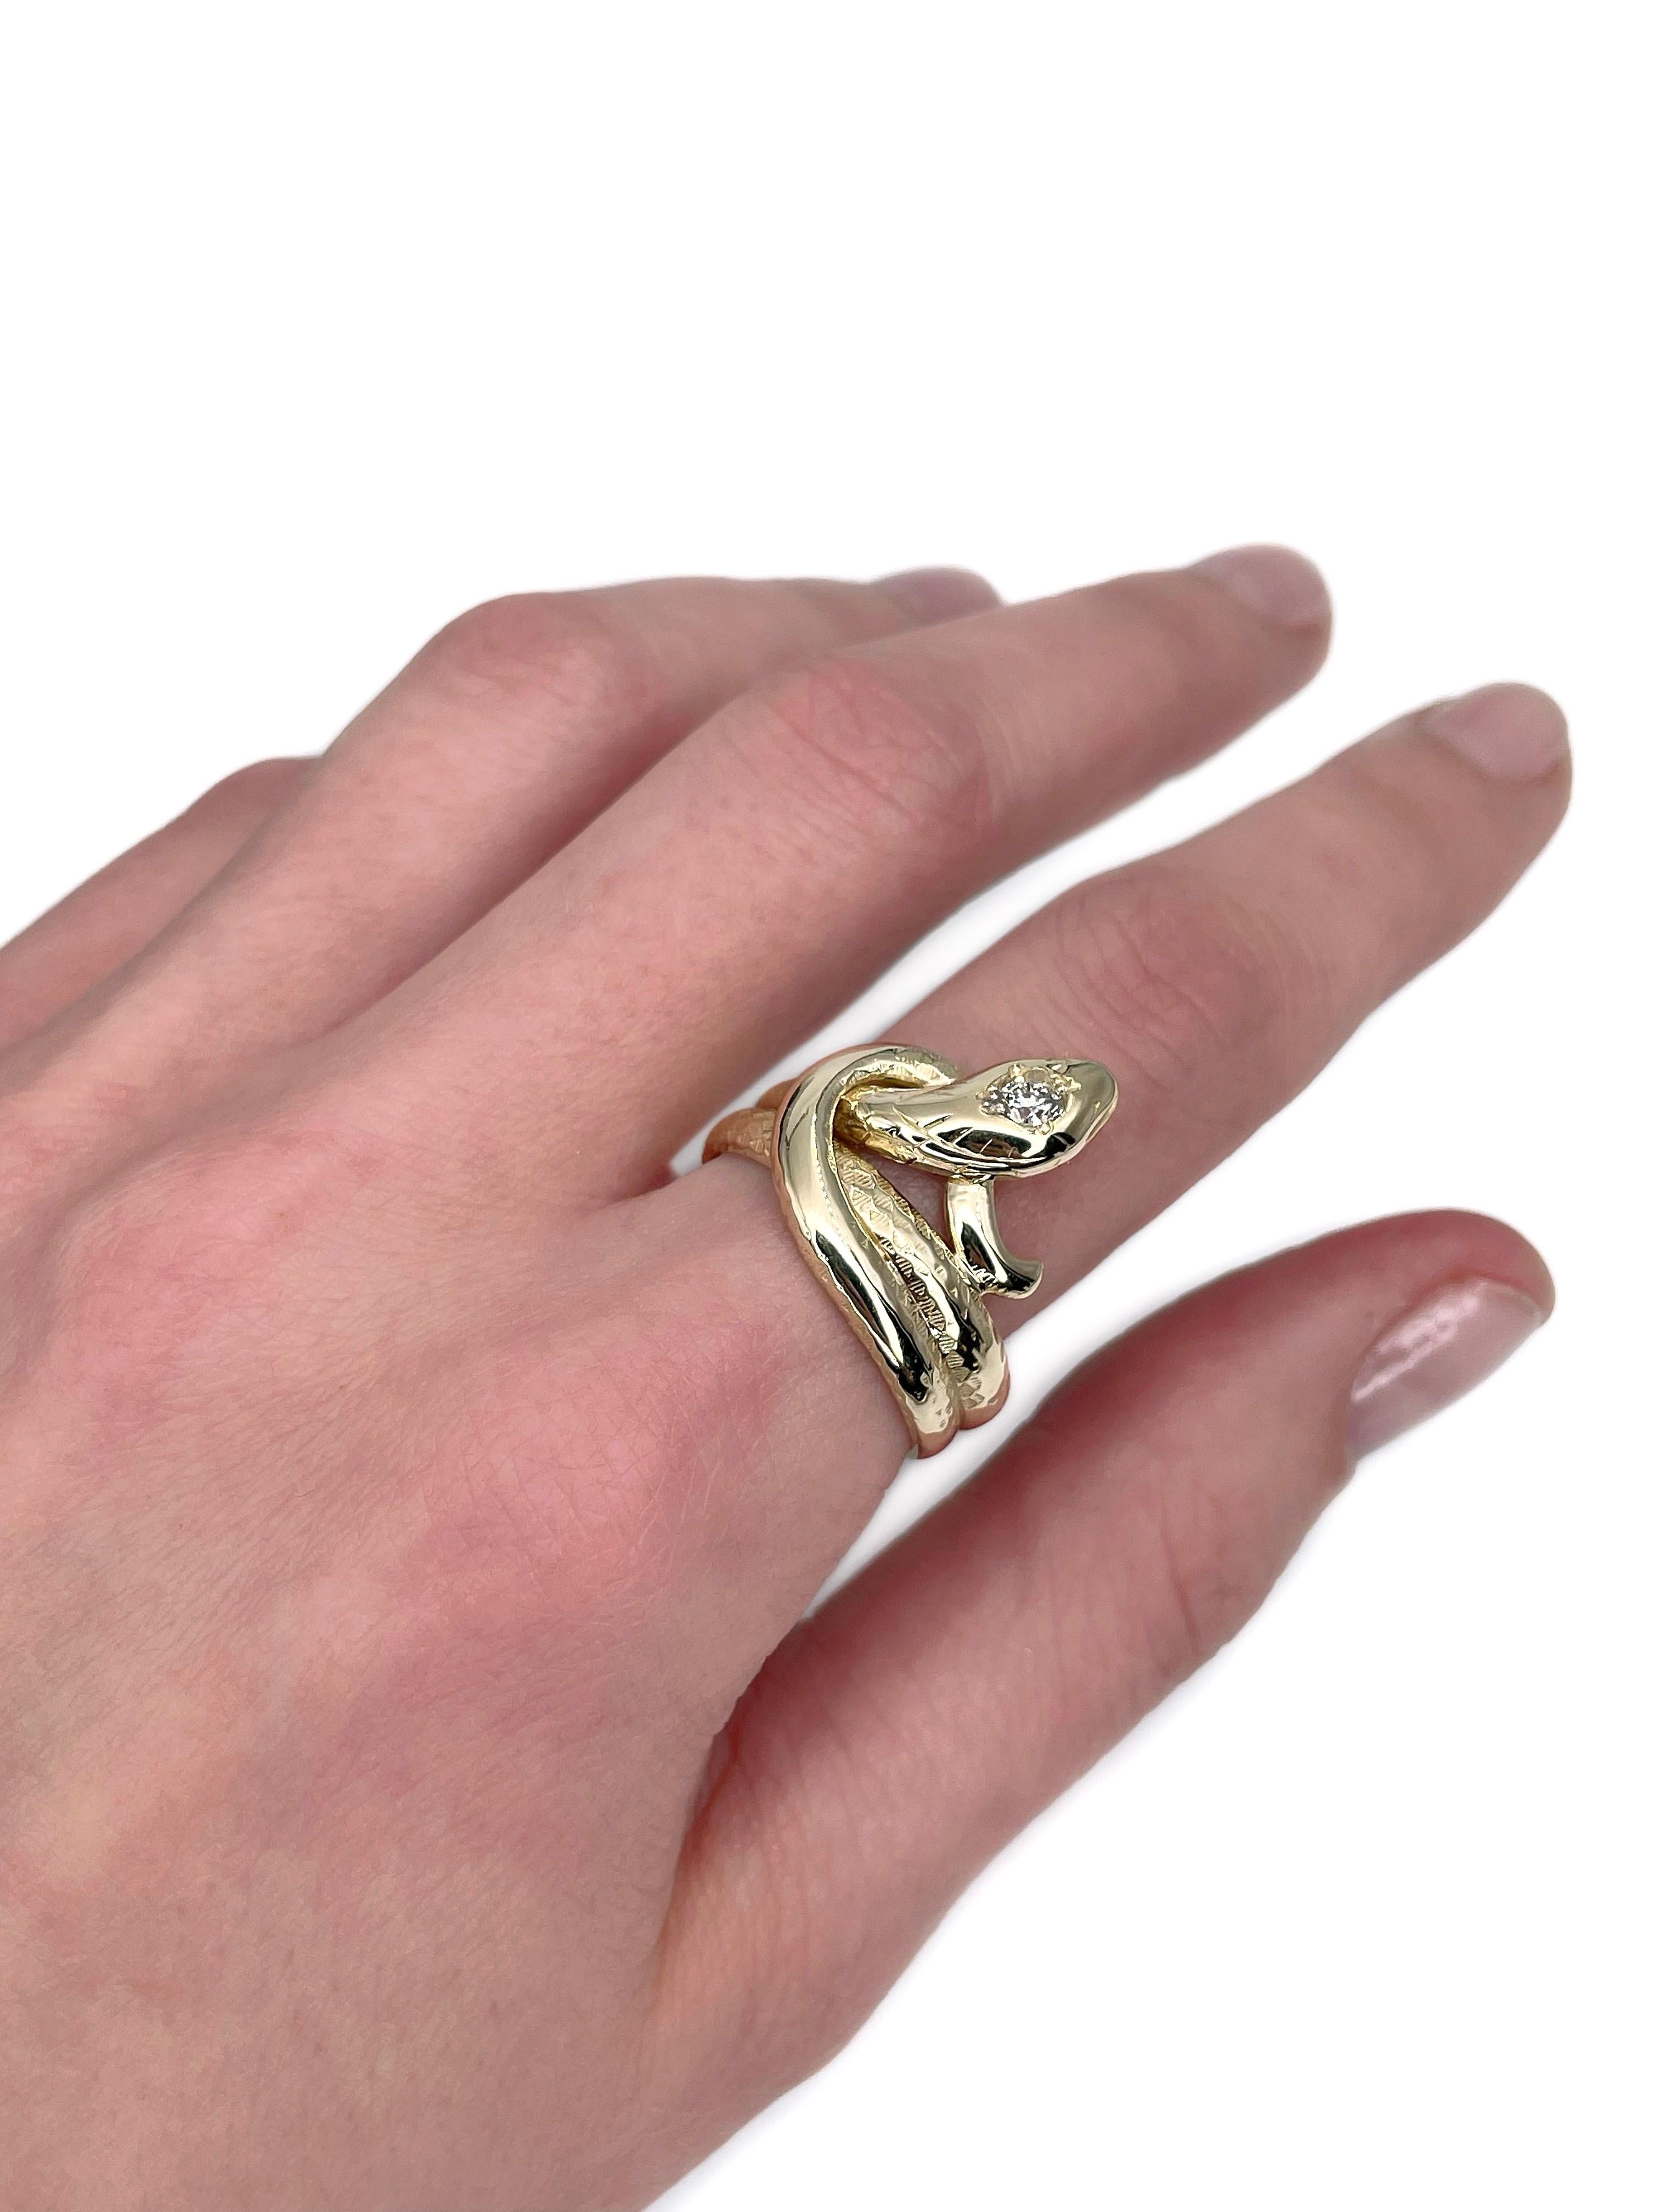 This is a Victorian snake ring crafted in 14K slightly yellow gold. Circa 1900. 

The piece features old cut diamond.

Signed “585”

Weight: 10.61g
Size: 19 (US 9)

IMPORTANT: please ask about the possibility to resize before purchase. This process